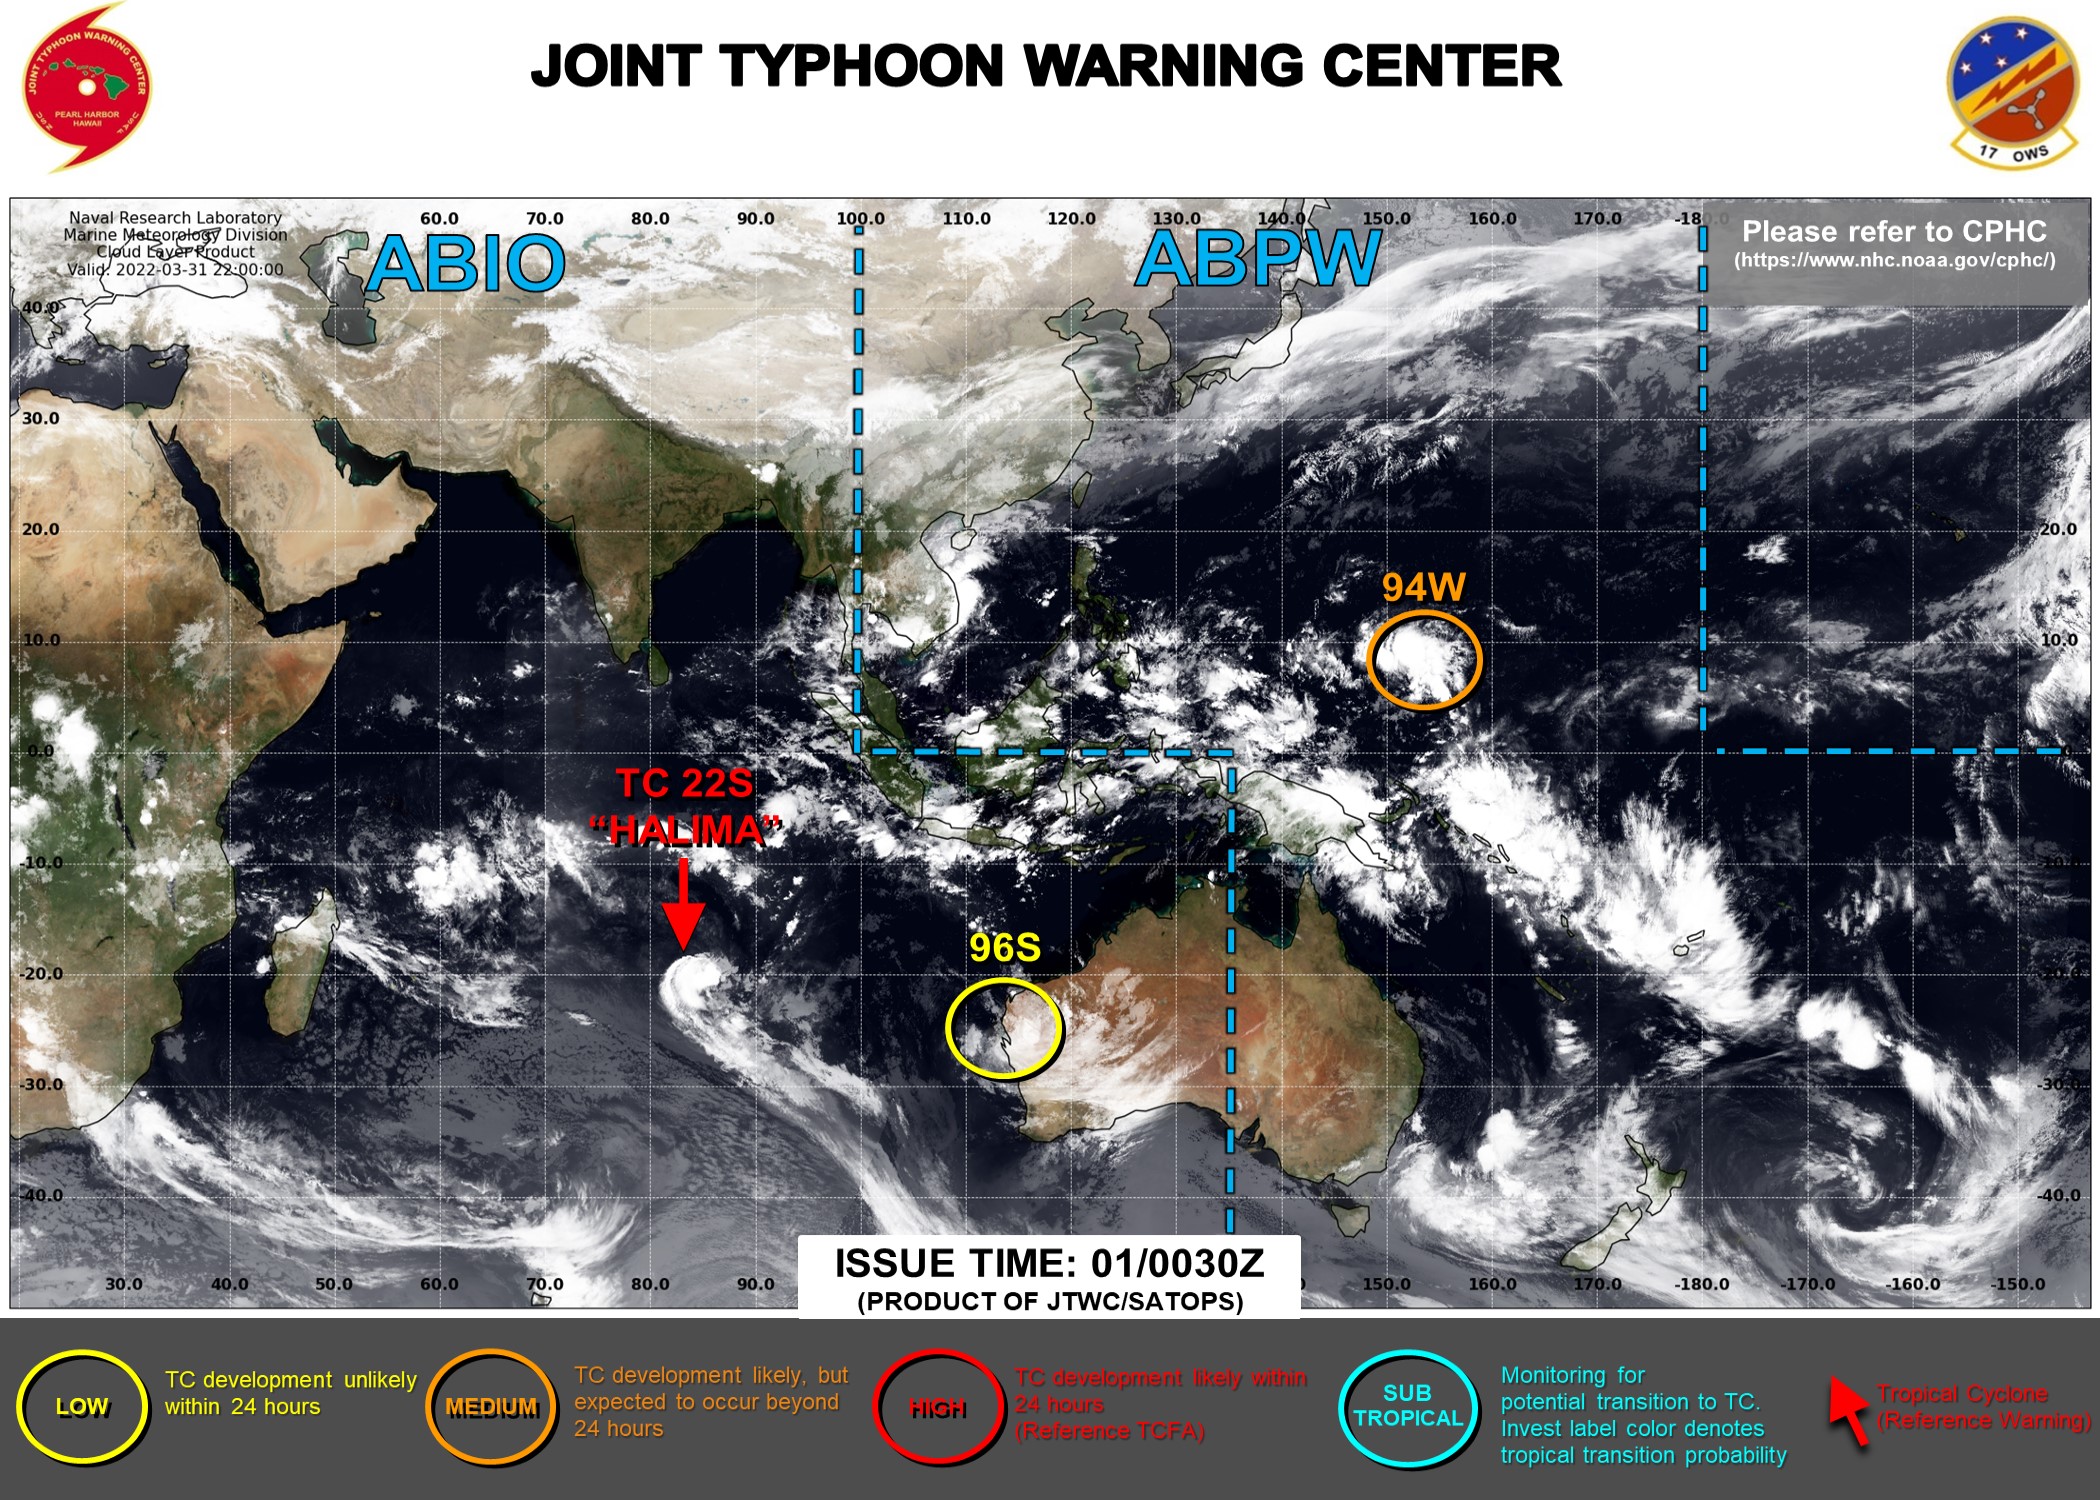 JTWC IS ISSUING 12HOURLY WARNINGS ON TC 22S(HALIMA). 3HOURLY SATELLITE BULLETINS ARE ISSUED ON TC 22S , INVEST 94W AND INVEST 96S.